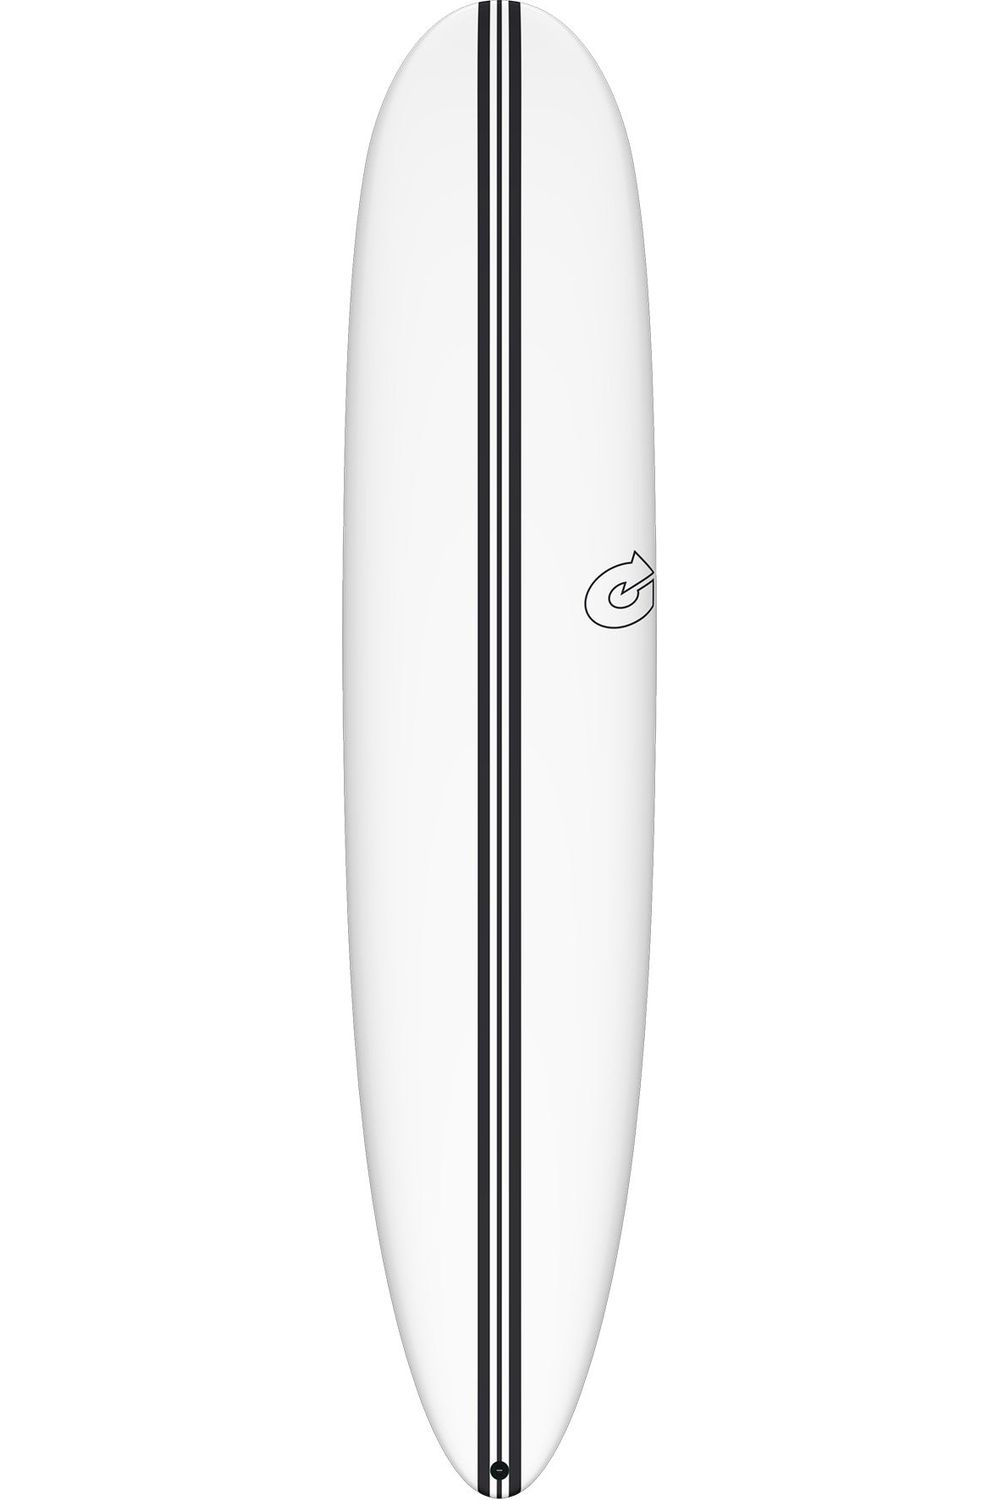 Torq TEC Surfboard: The Don in White